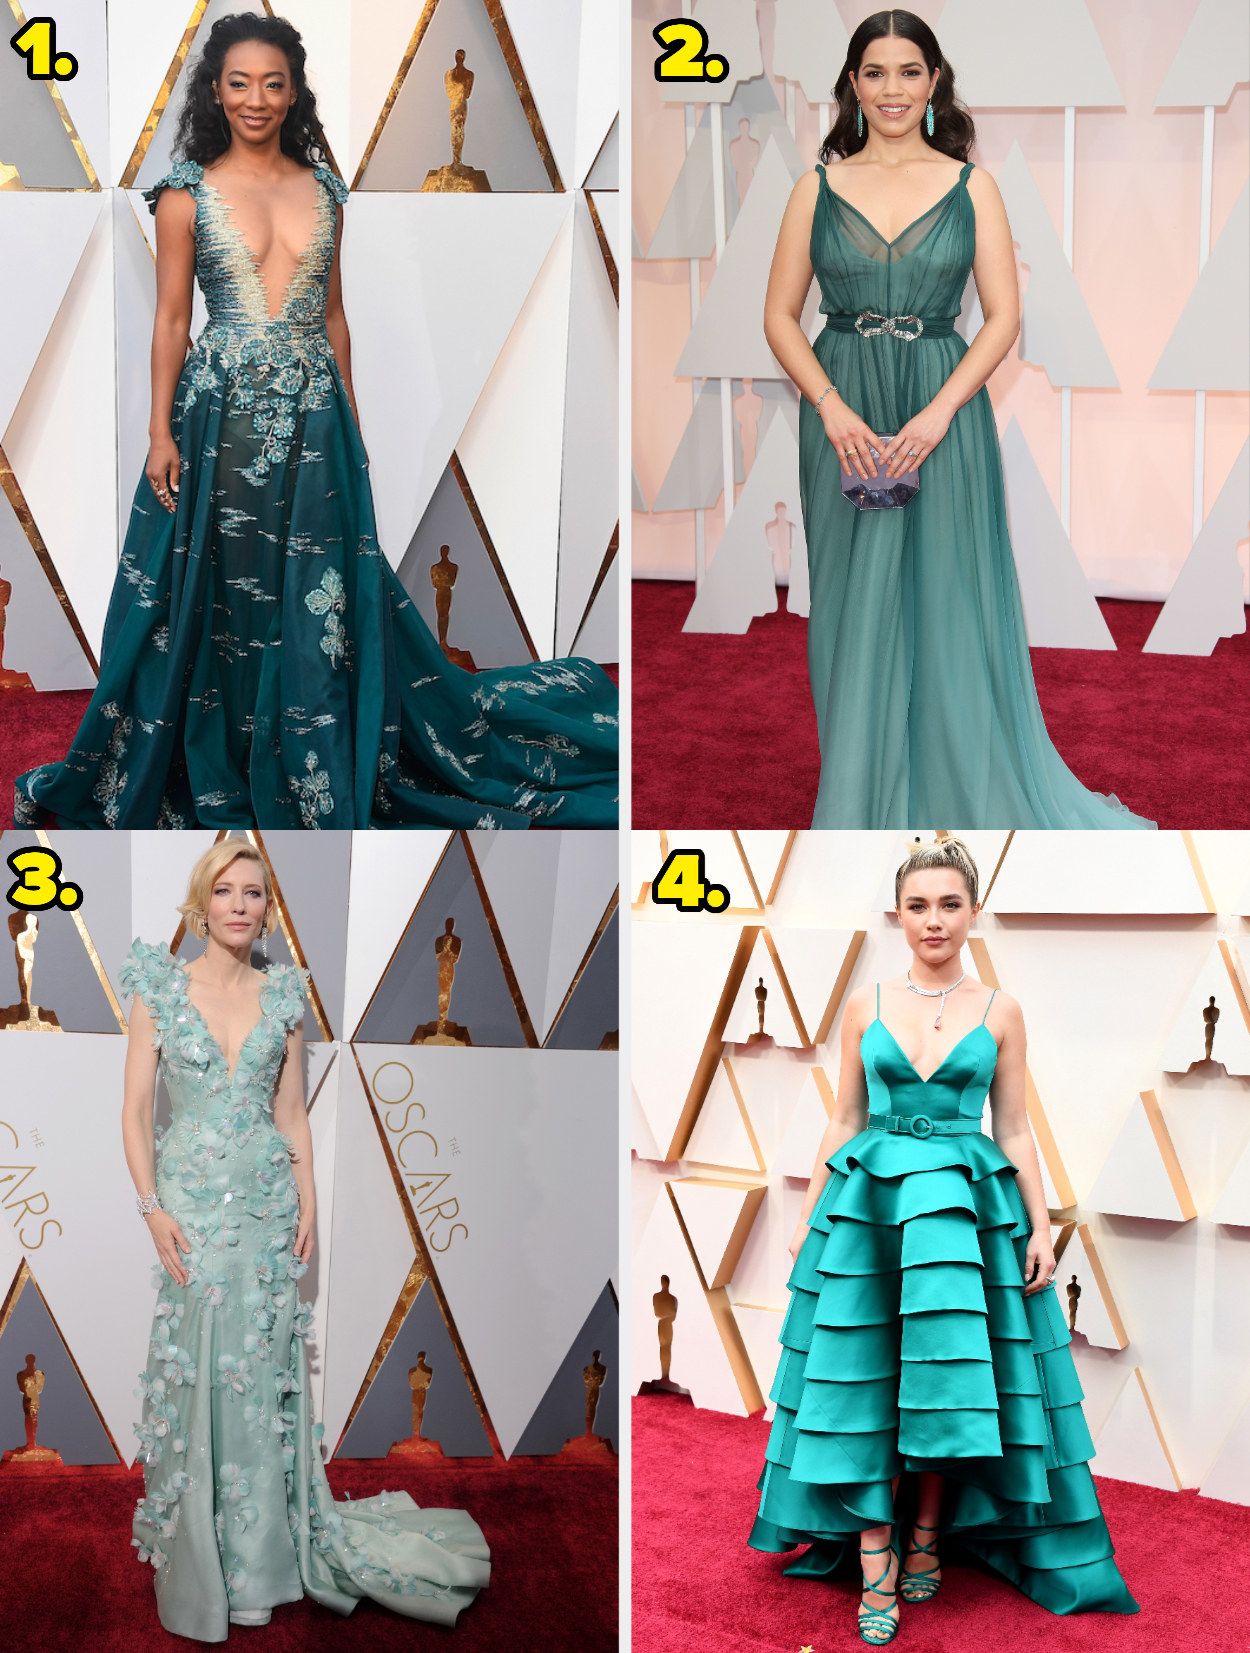 1. Betty Gabriel wears a deep v neck gown with flowers embroidered 2. America wears a v-neck flowing gown. 3. Cate Blanchet wears a v-neck gown with flower appliques. 4. Florence Pugh wears a v-neck gown with a tiered skirt